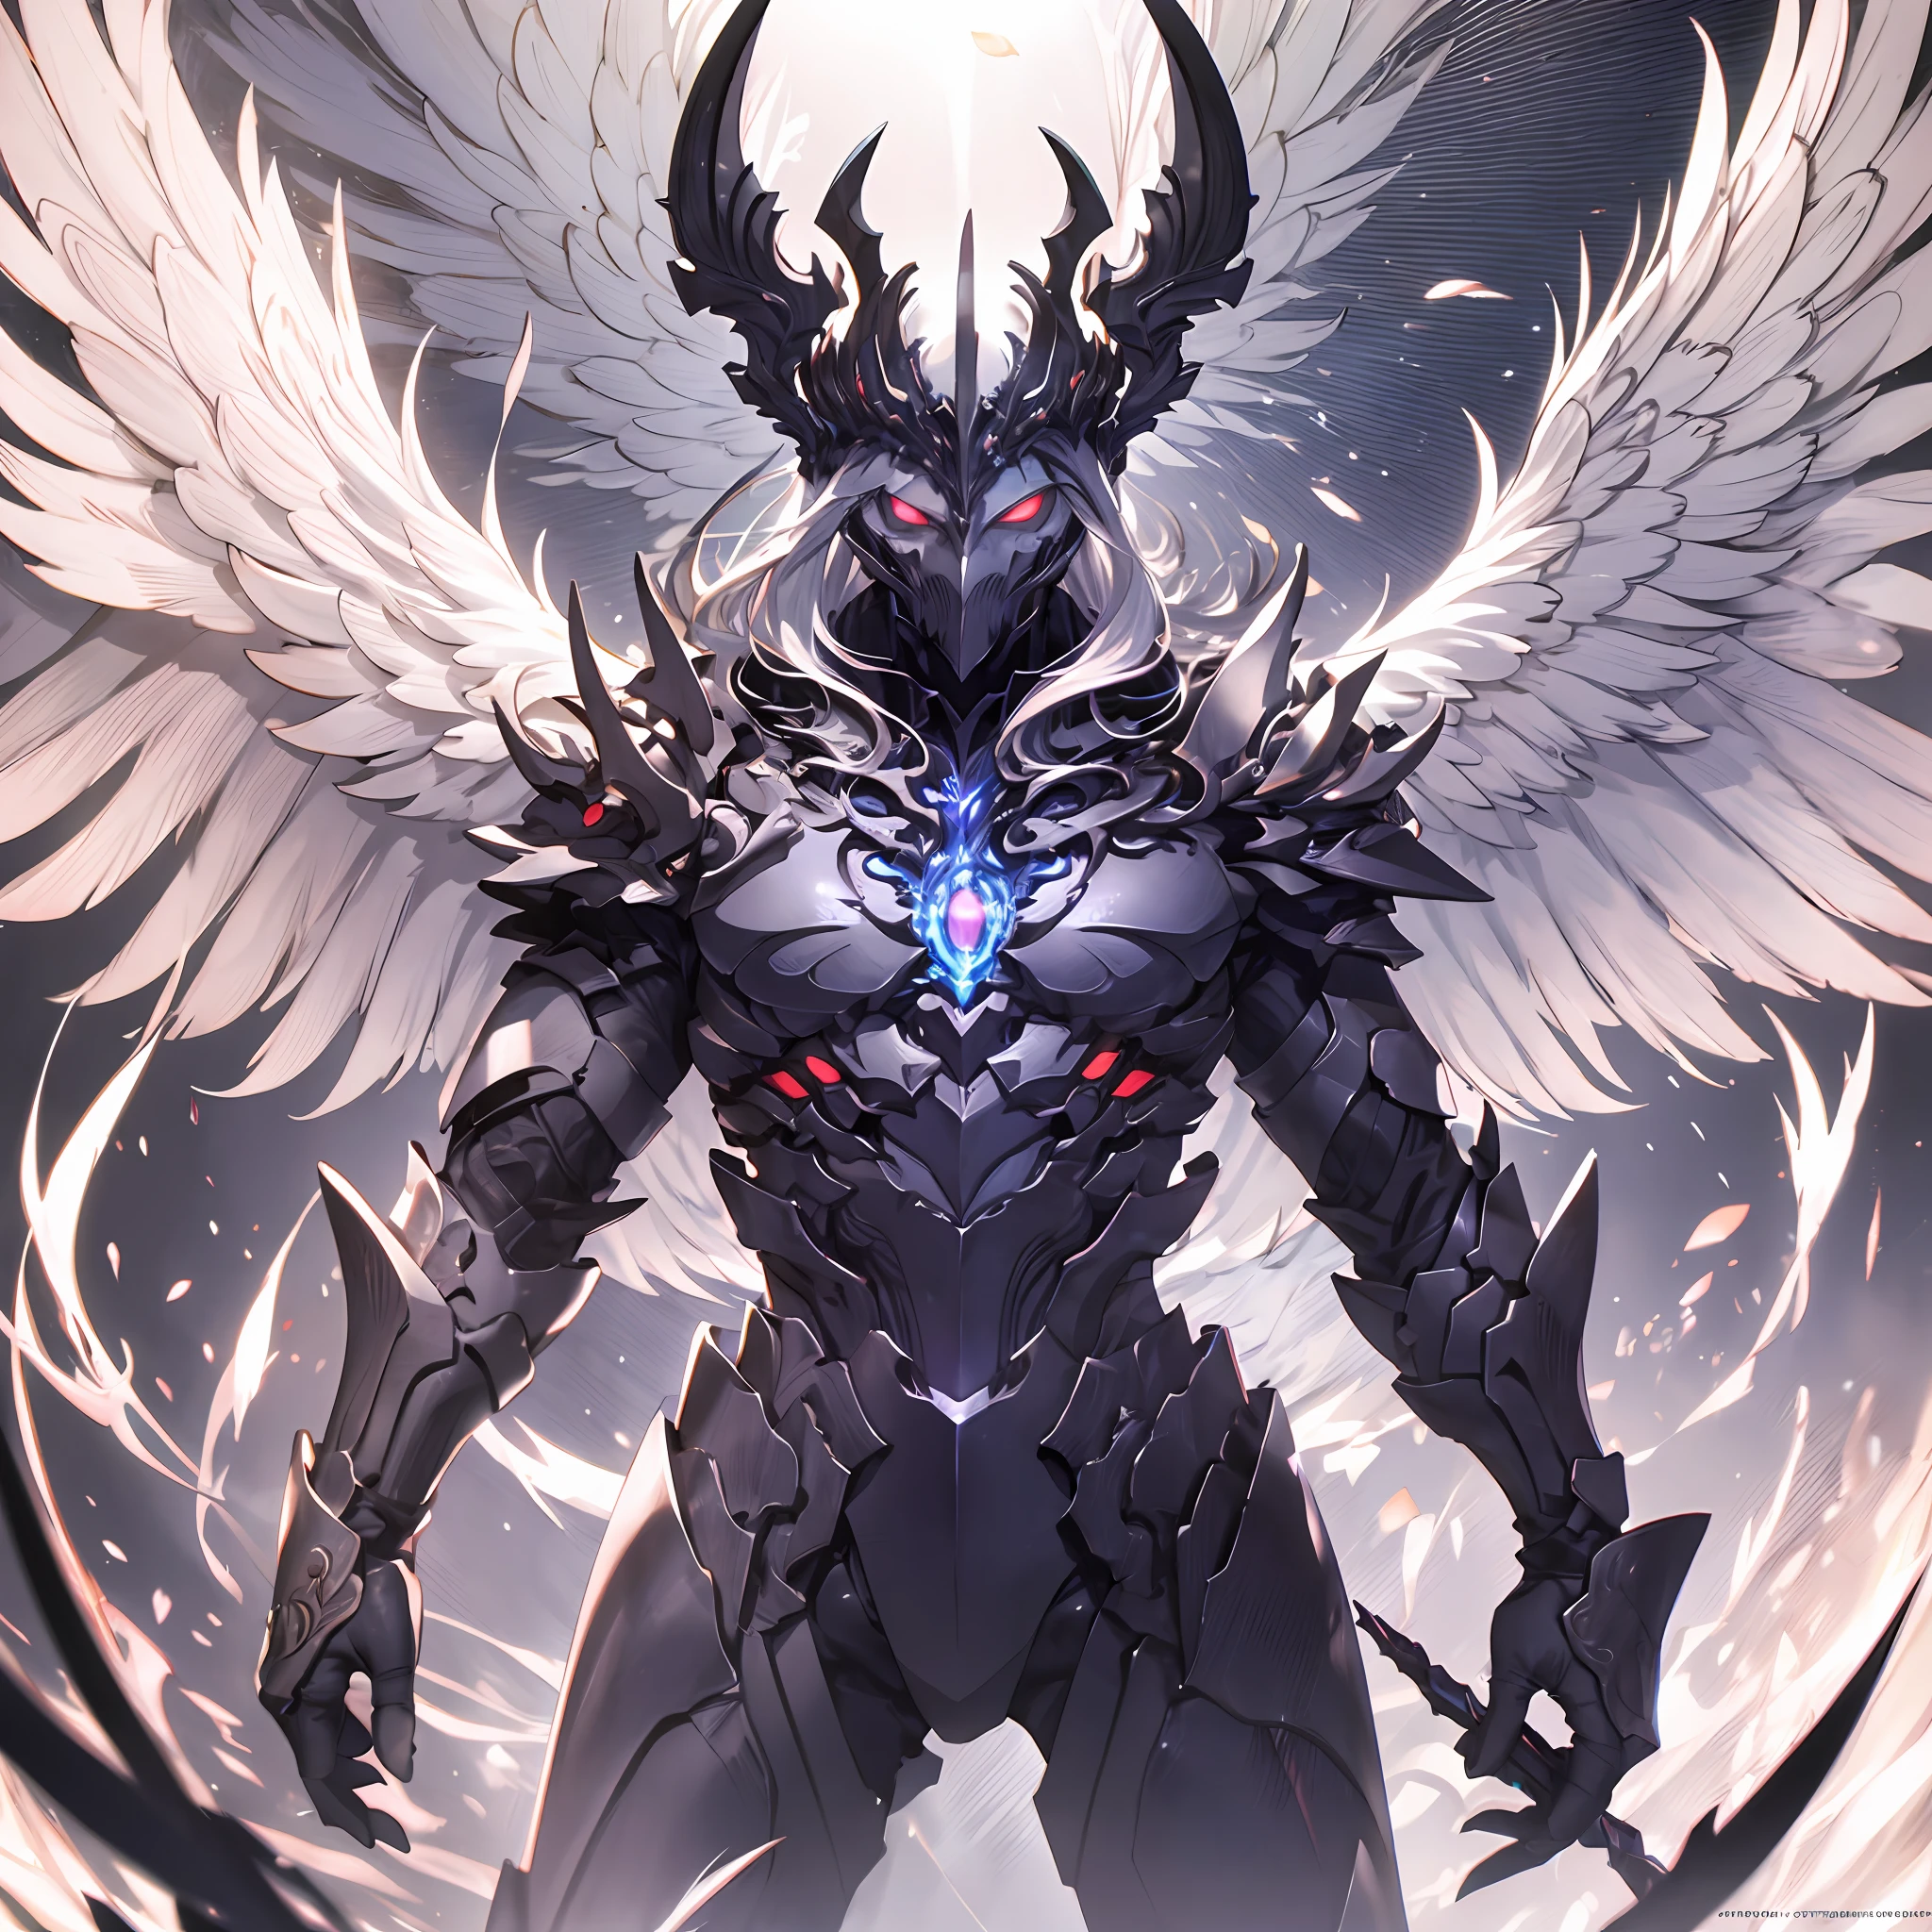 masterpiece, highly detailed CG unified 8K wallpapers, 8k uhd, dslr, high quality, clean, best illumination, a god in a white armor, white wings, glowing eyes, cinematic, ultra-high resolution, ultra-high detailed, high-definition, shadowverse style